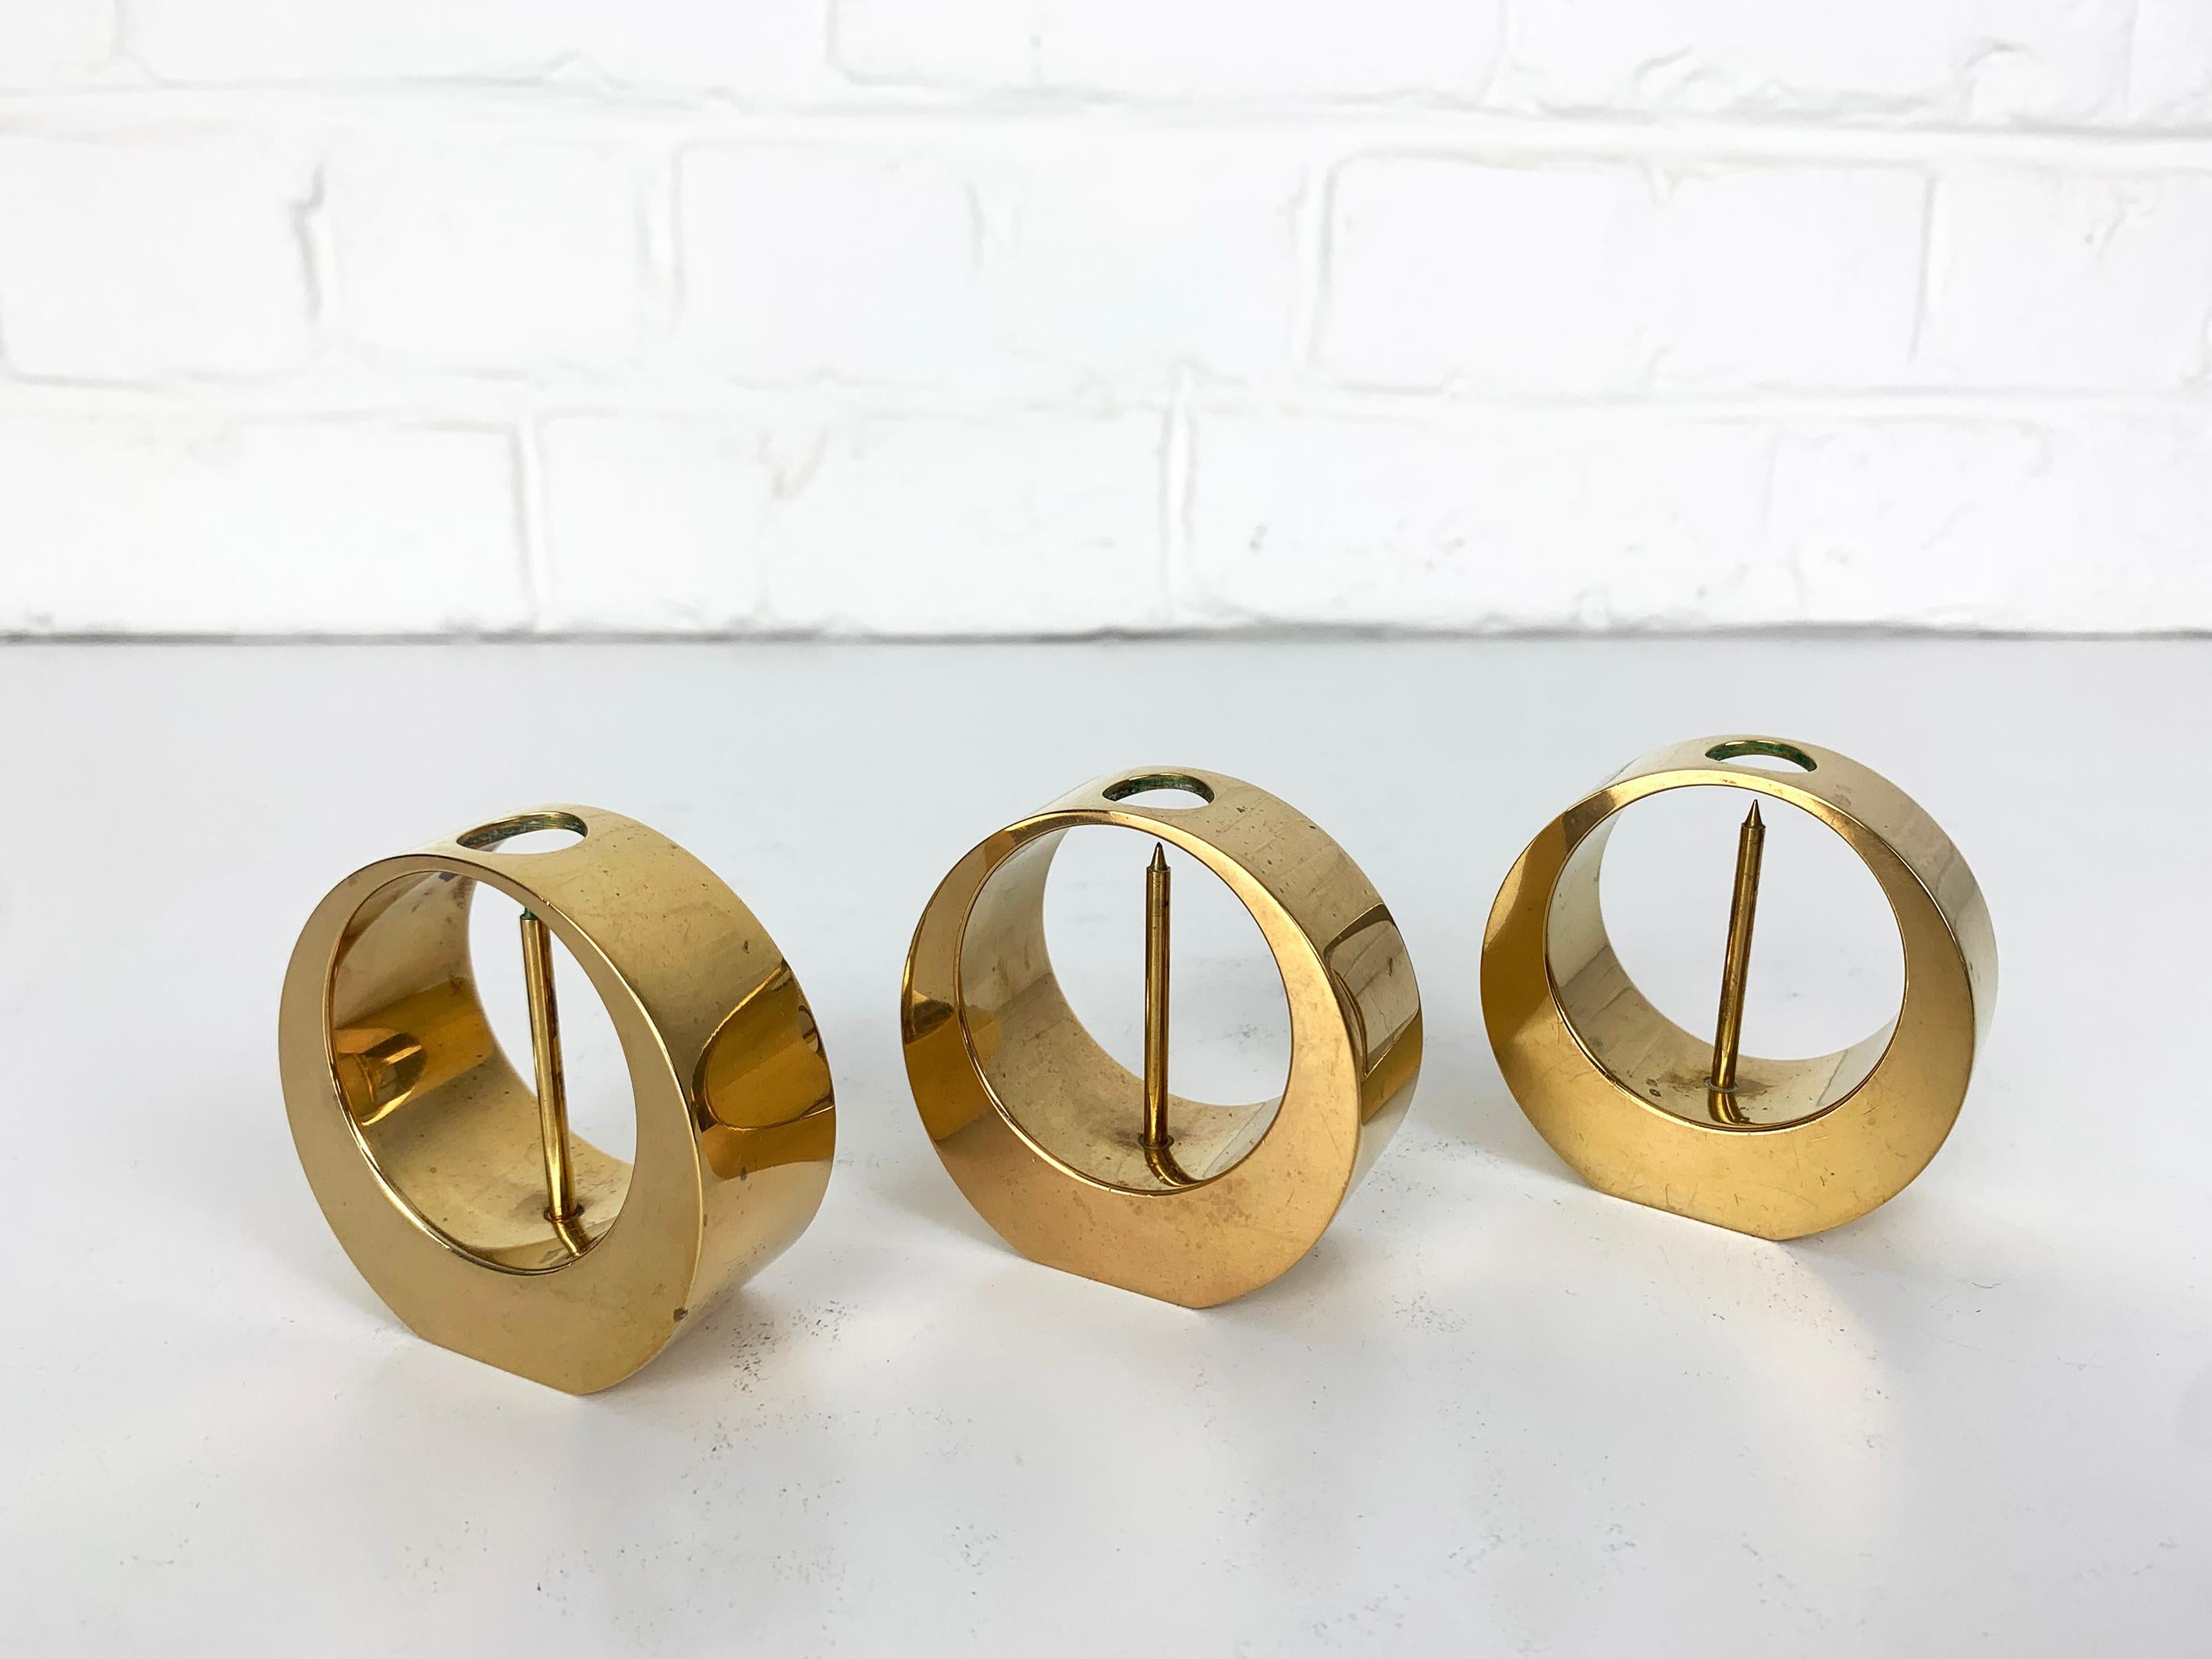 A set of three Mid-Century candle-sticks or candle-holders in solid brass. 

Created and made by Arthur Petterson, he signed his candleholders “Arthur Pe Kolbäck”.

The artist was born in 1919 in Kolbäck, Sweden, where he lived and worked all his